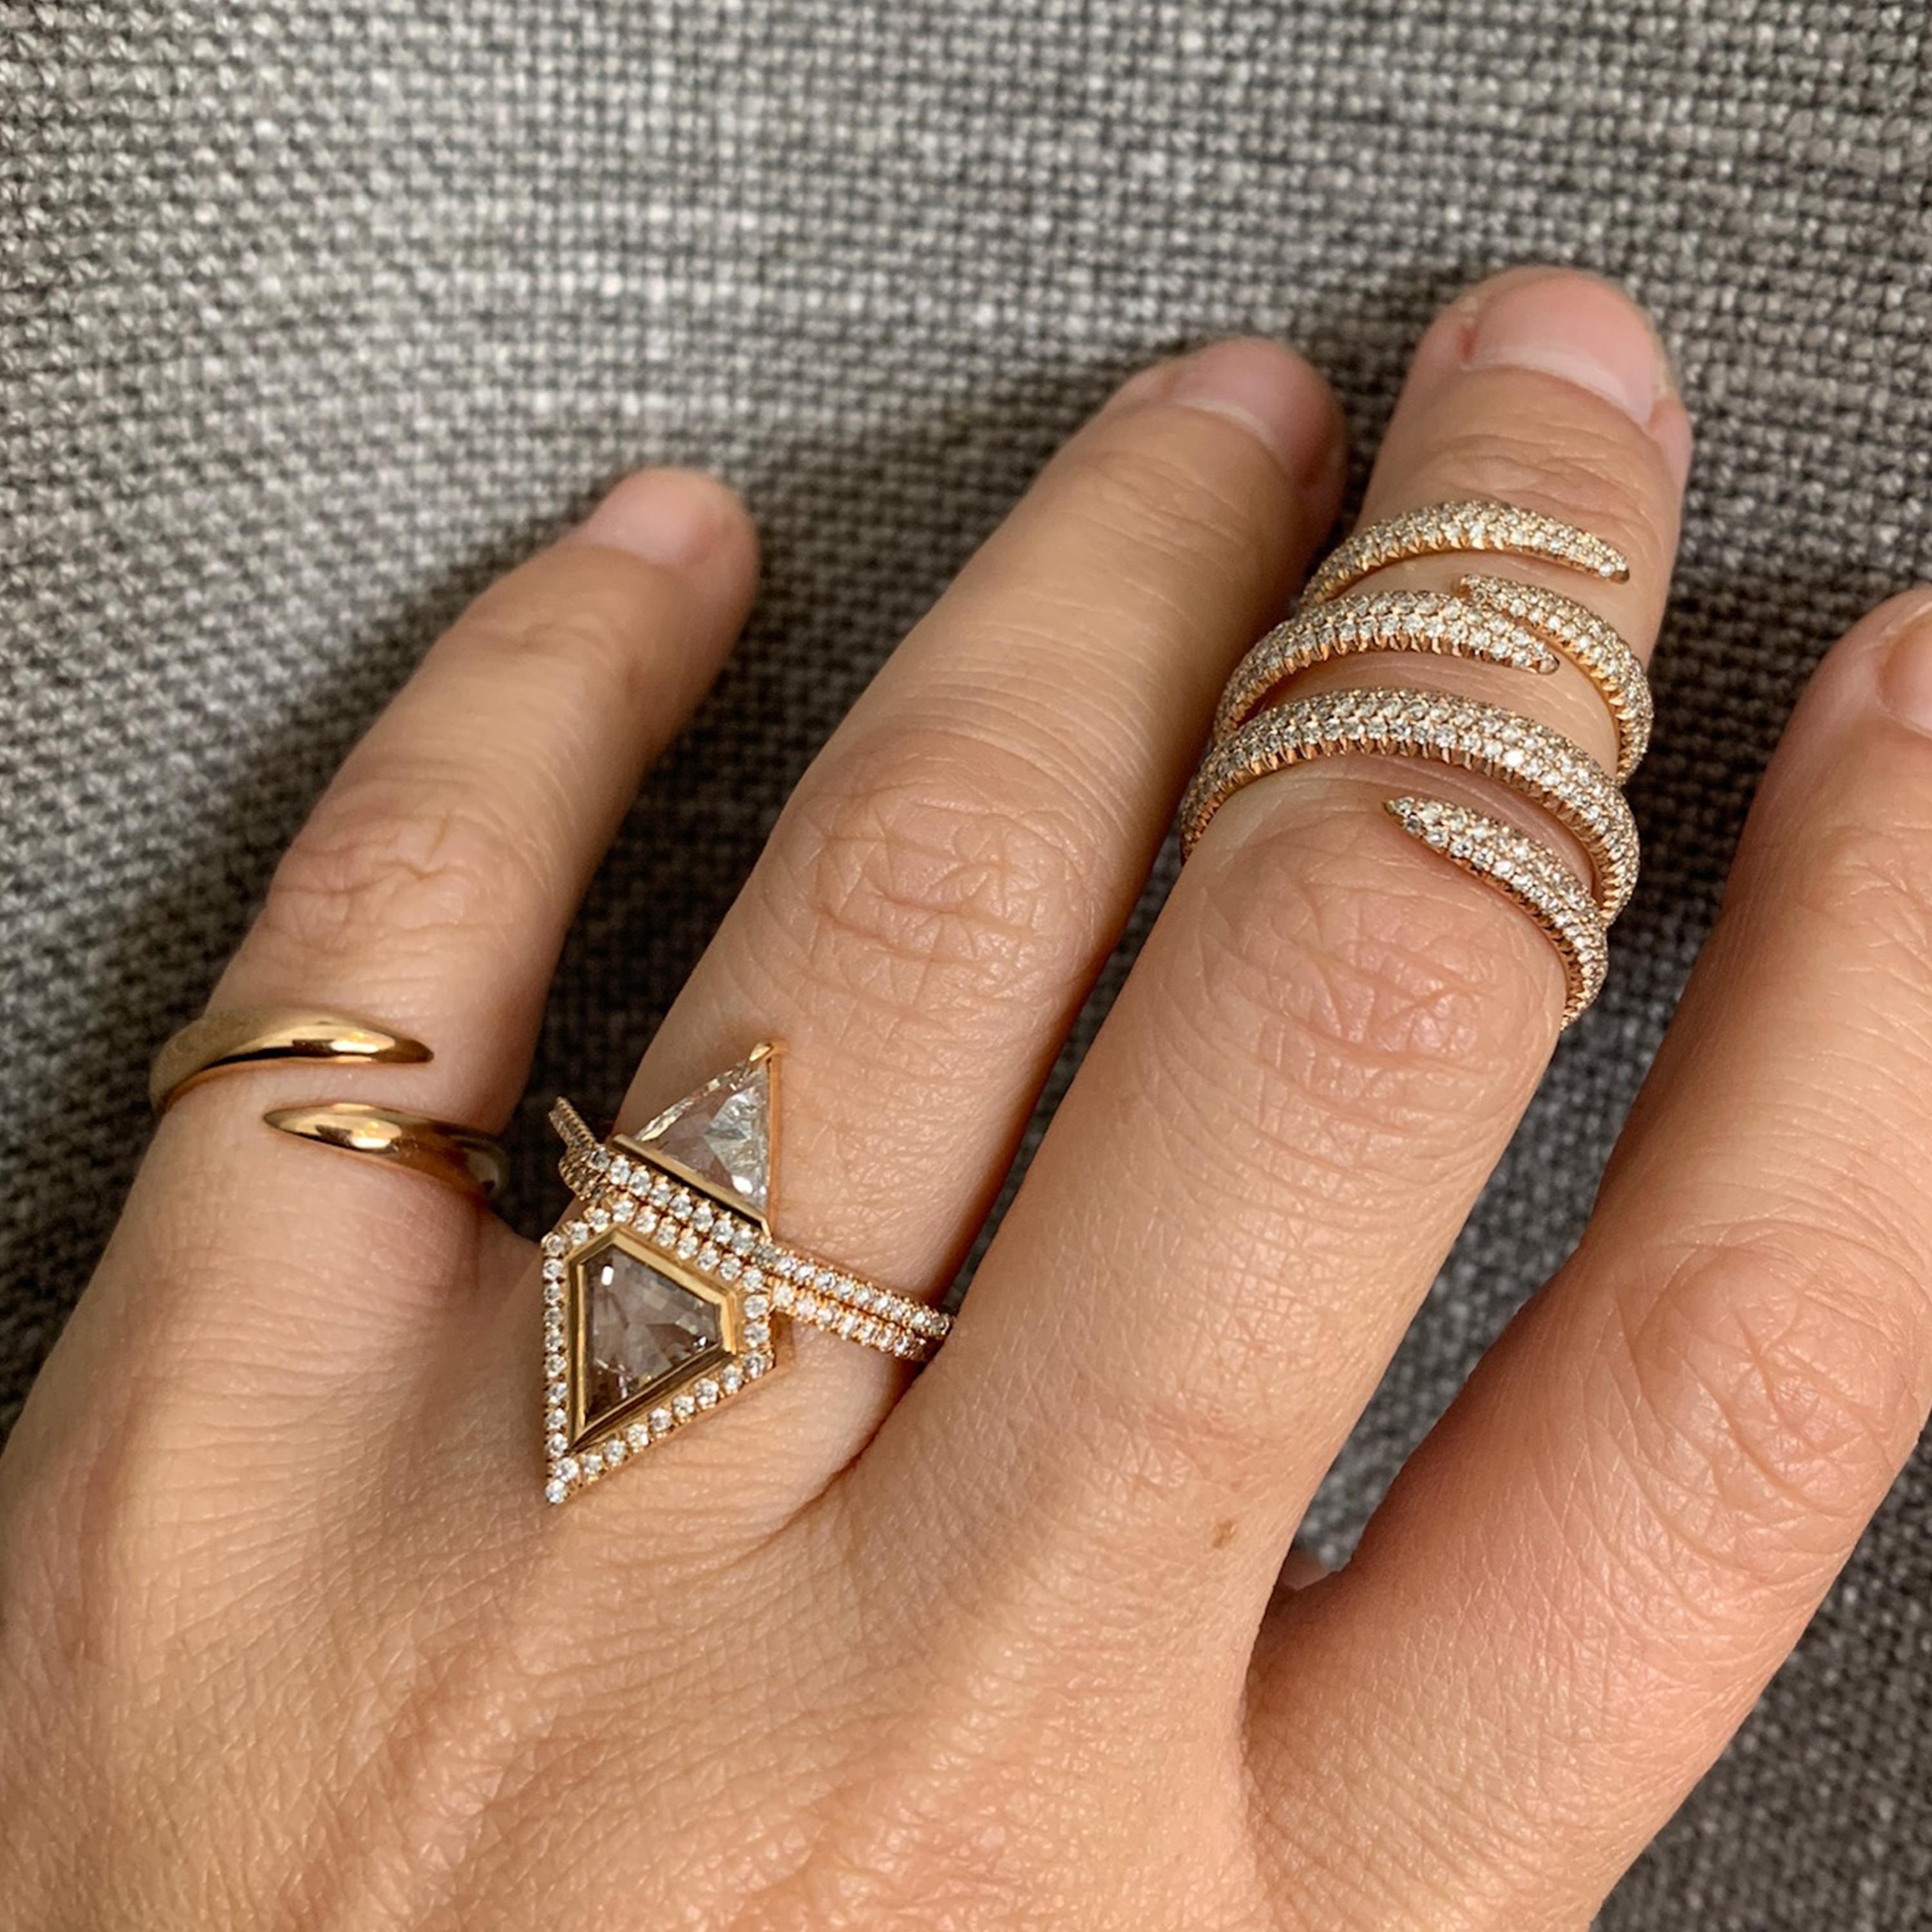 18K Rose Gold - Size 3.5 

Additional sizes are available and this ring can be made to order in any size. This ring can be worn on any finger and is most commonly worn as a pinky or midi-ring. This style also comes in additional gold and diamond